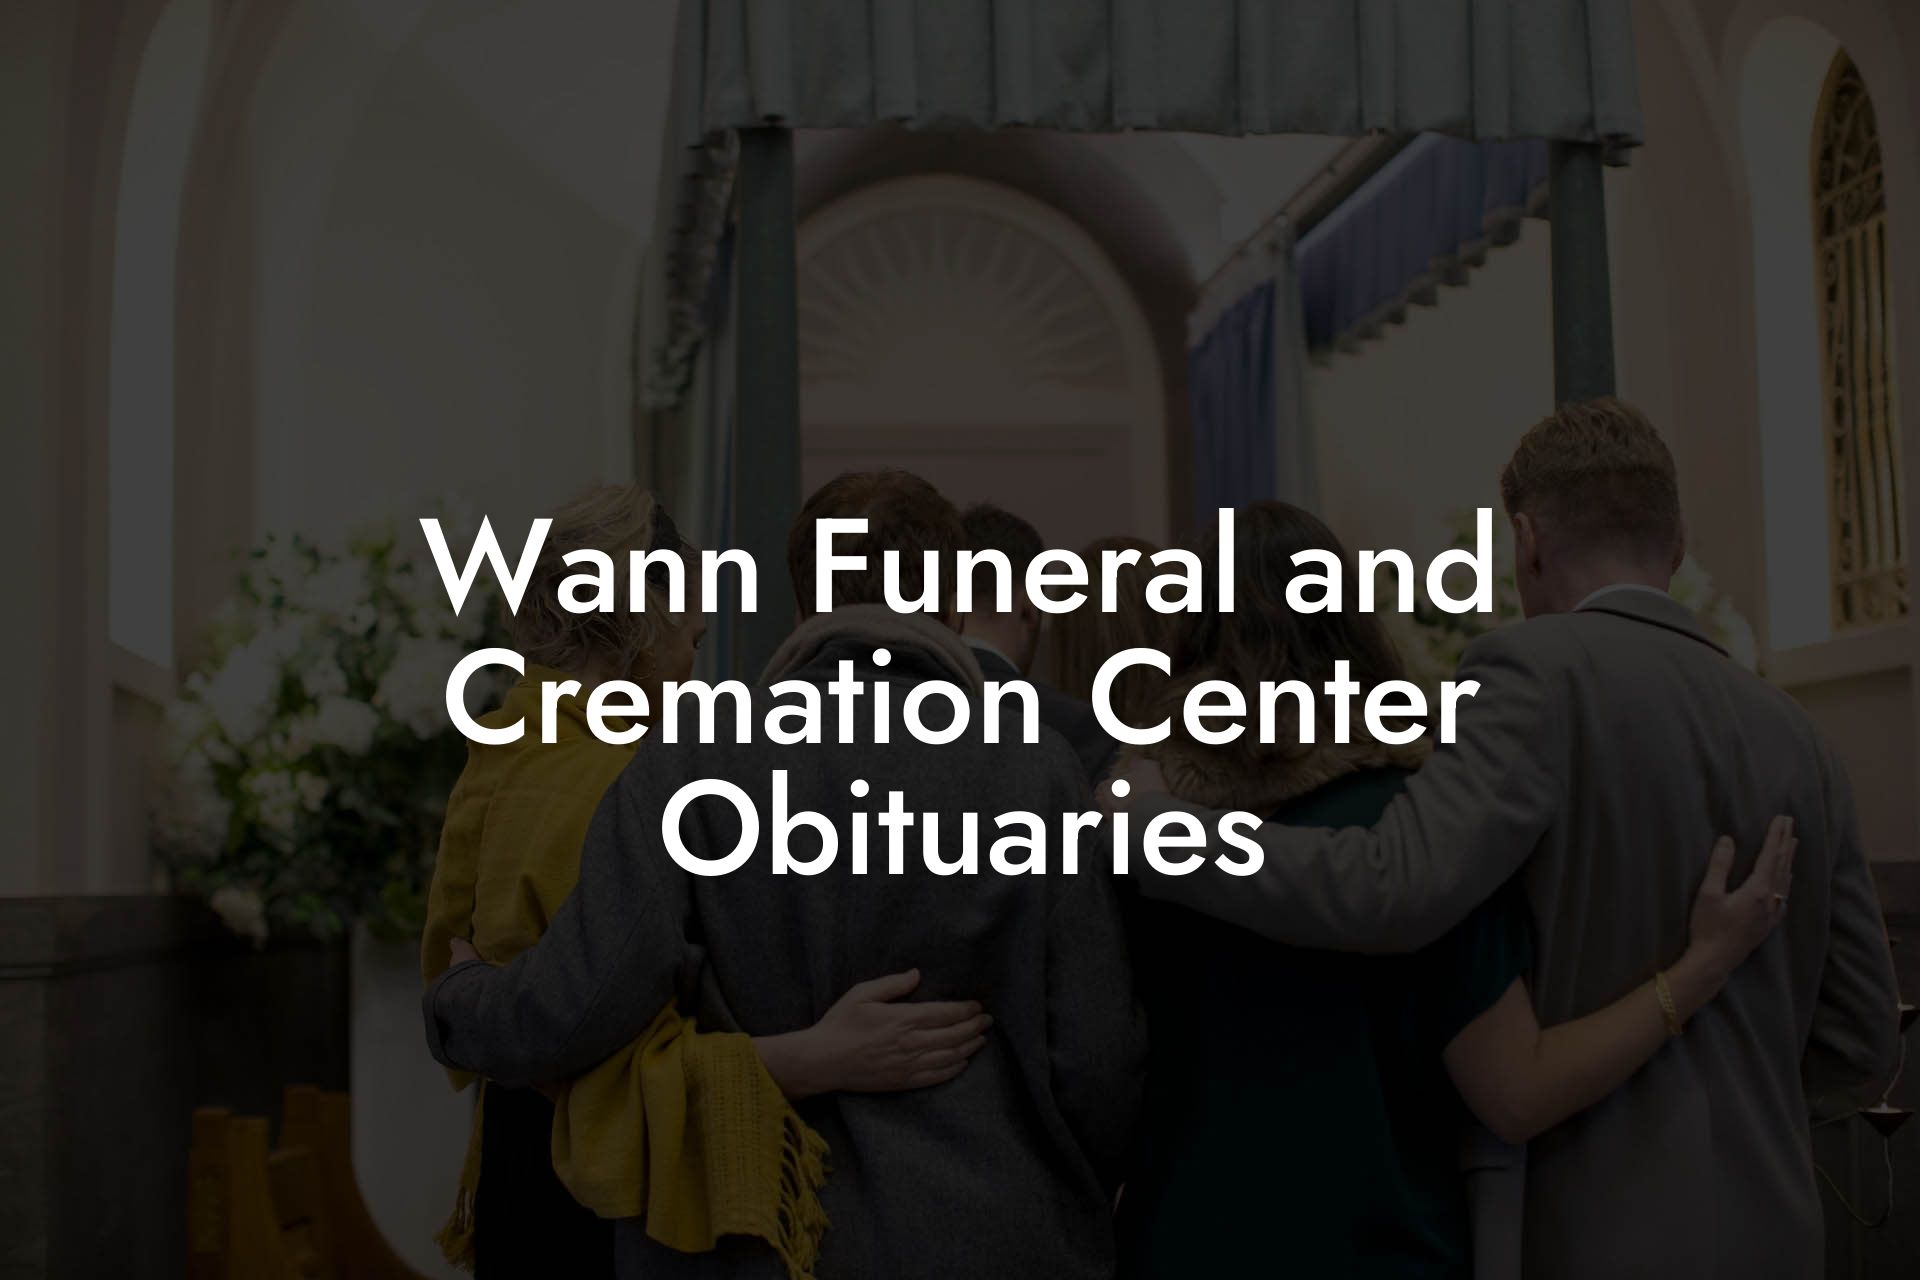 Wann Funeral and Cremation Center Obituaries